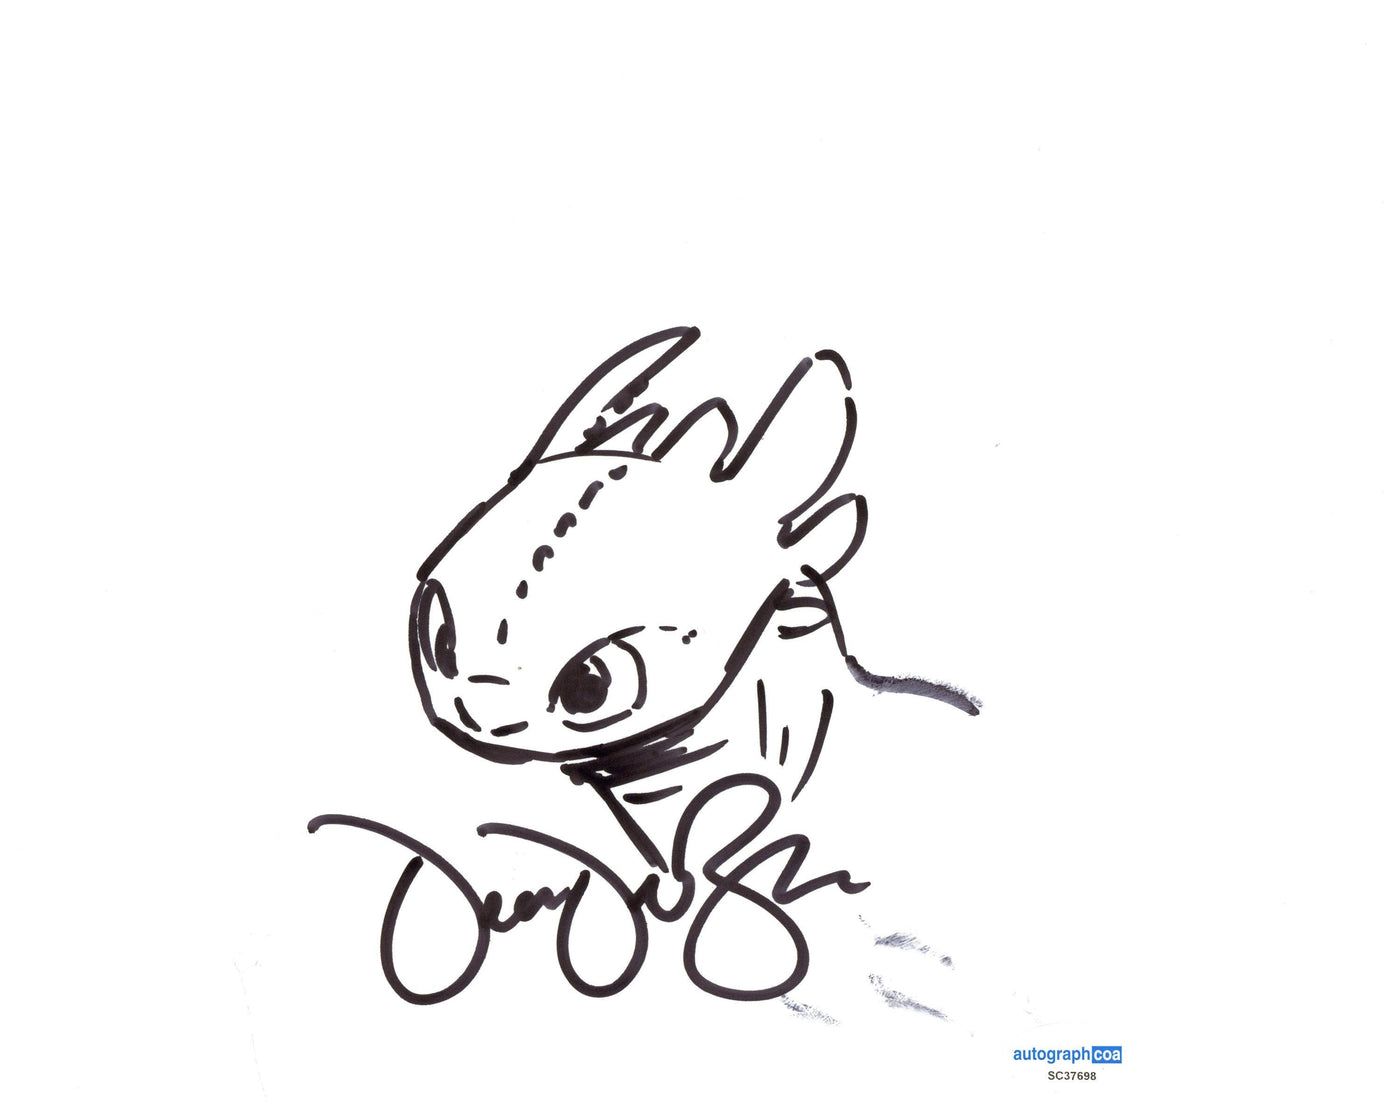 Dean Deblois Signed and Sketch How to Train Your Dragon 8x10 Autographed ACOA